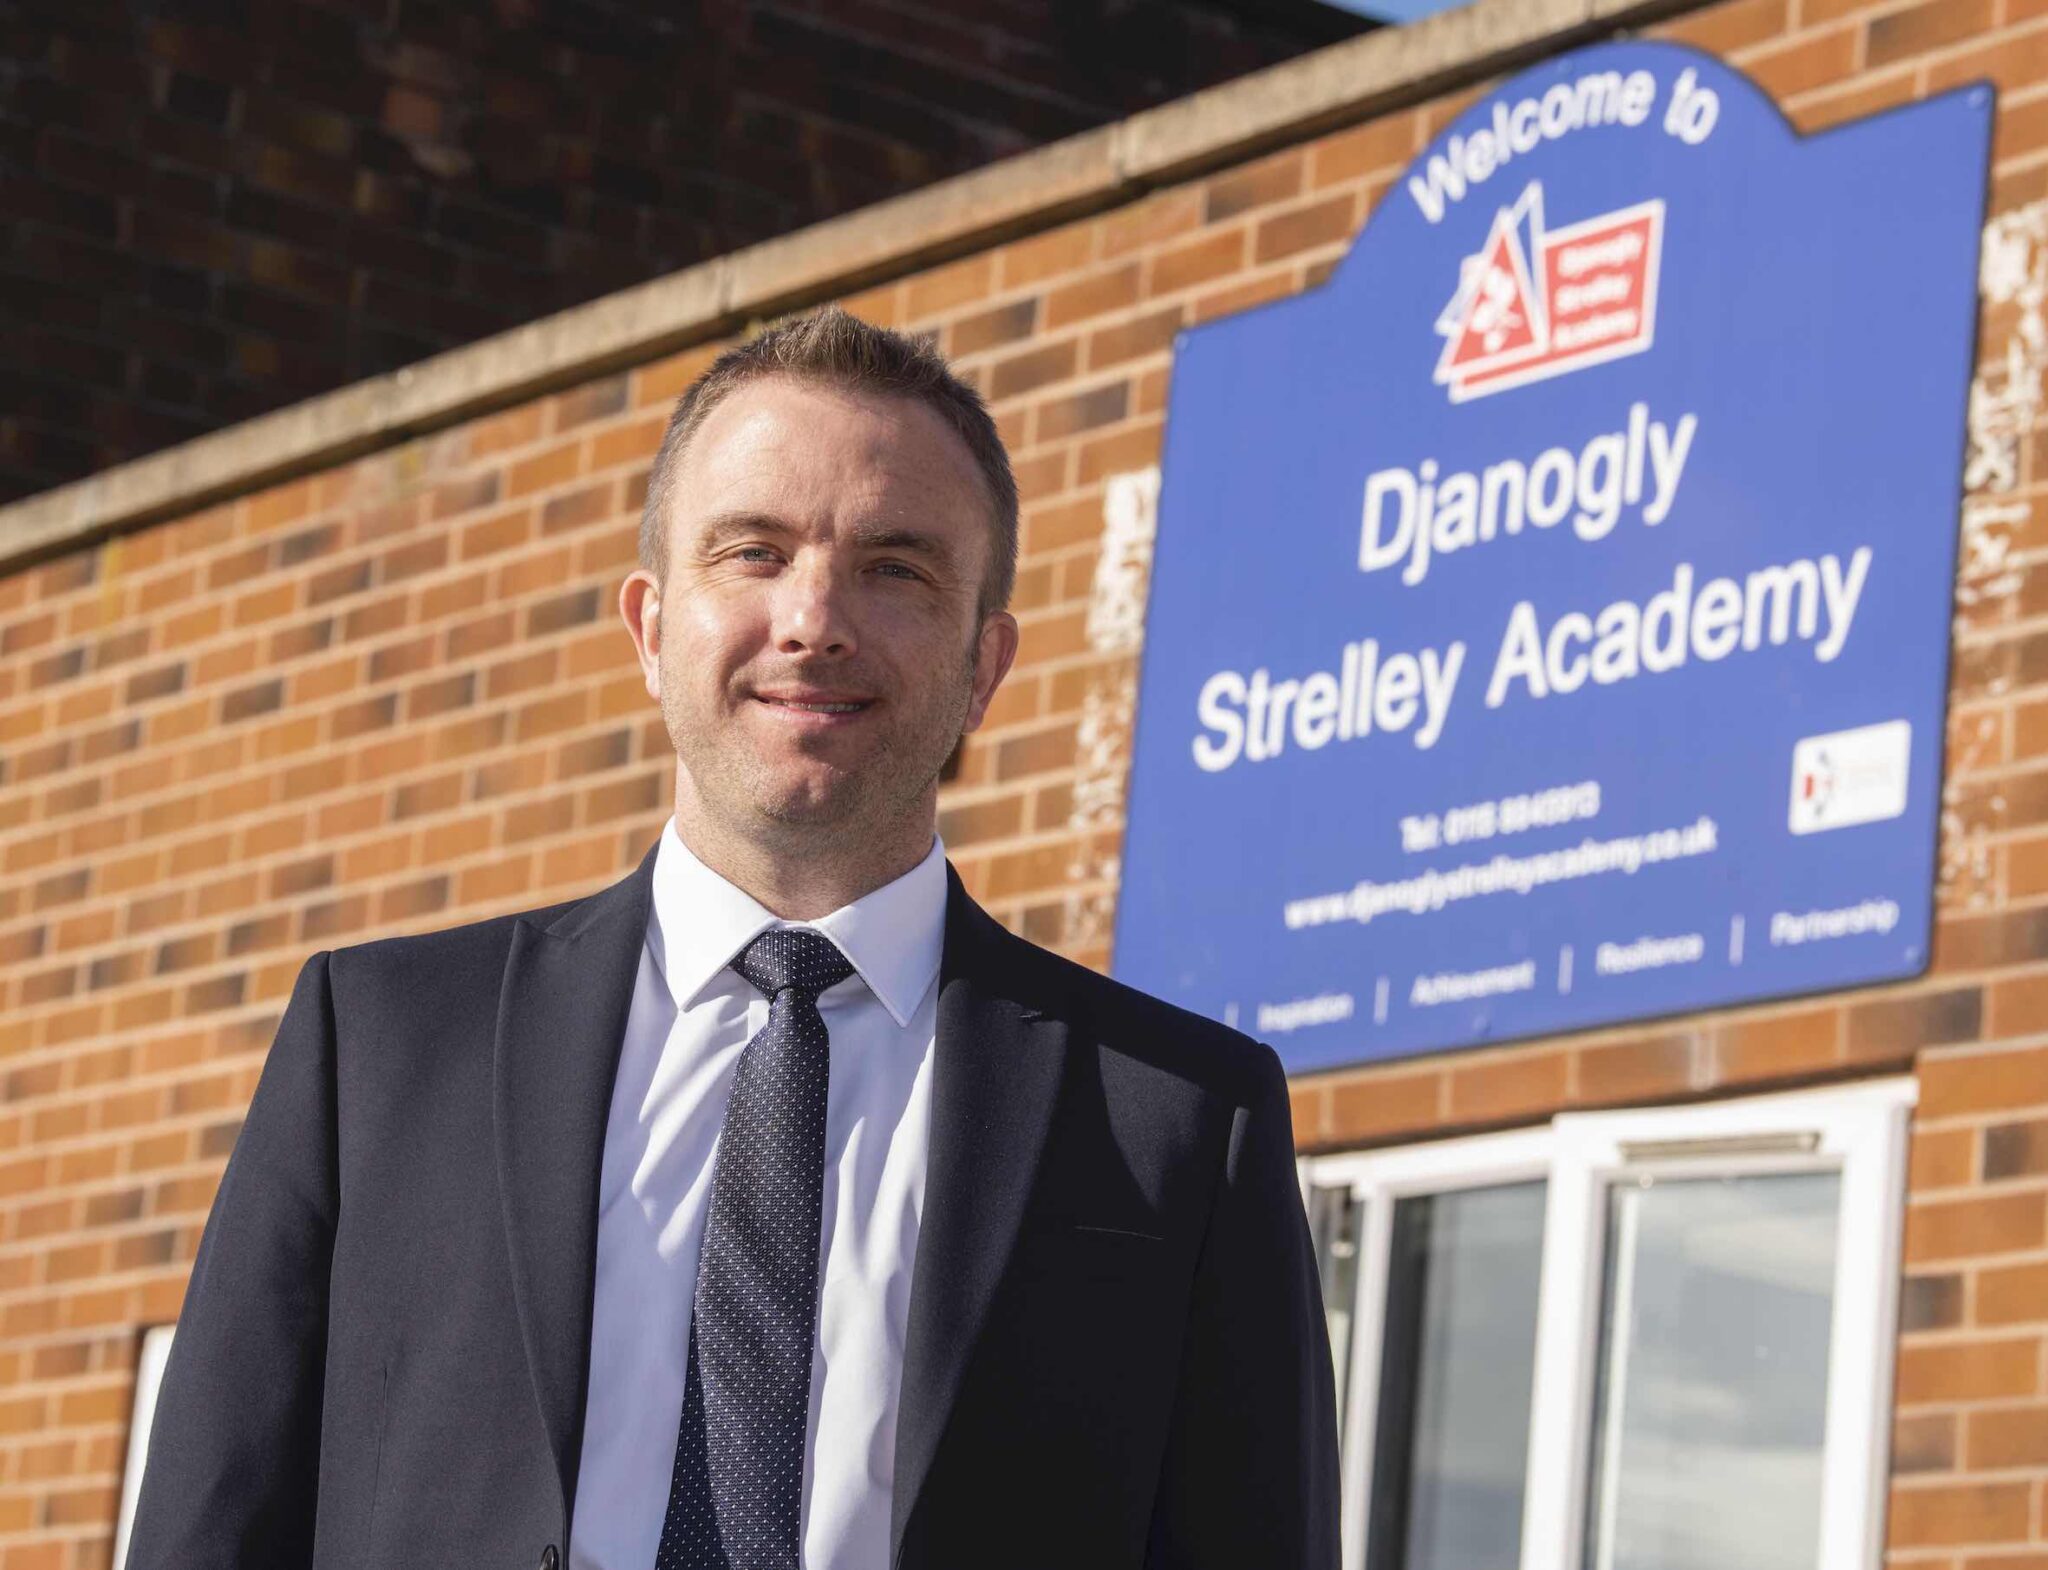 Ofsted Praises Djanogly Strelley Academy For Being A Happy And